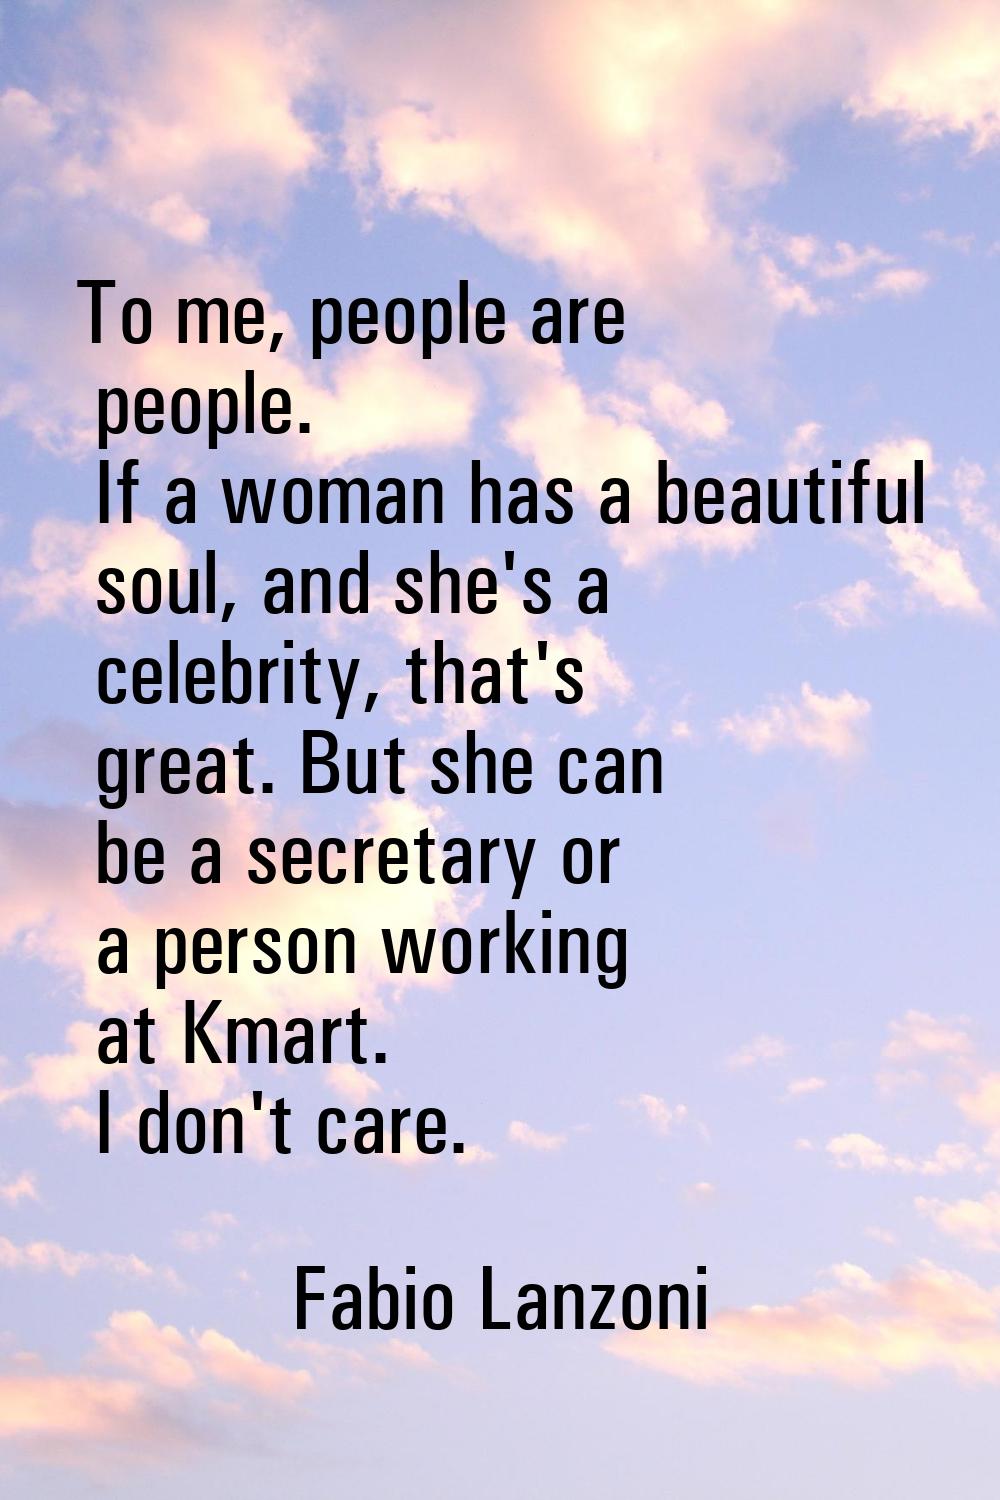 To me, people are people. If a woman has a beautiful soul, and she's a celebrity, that's great. But